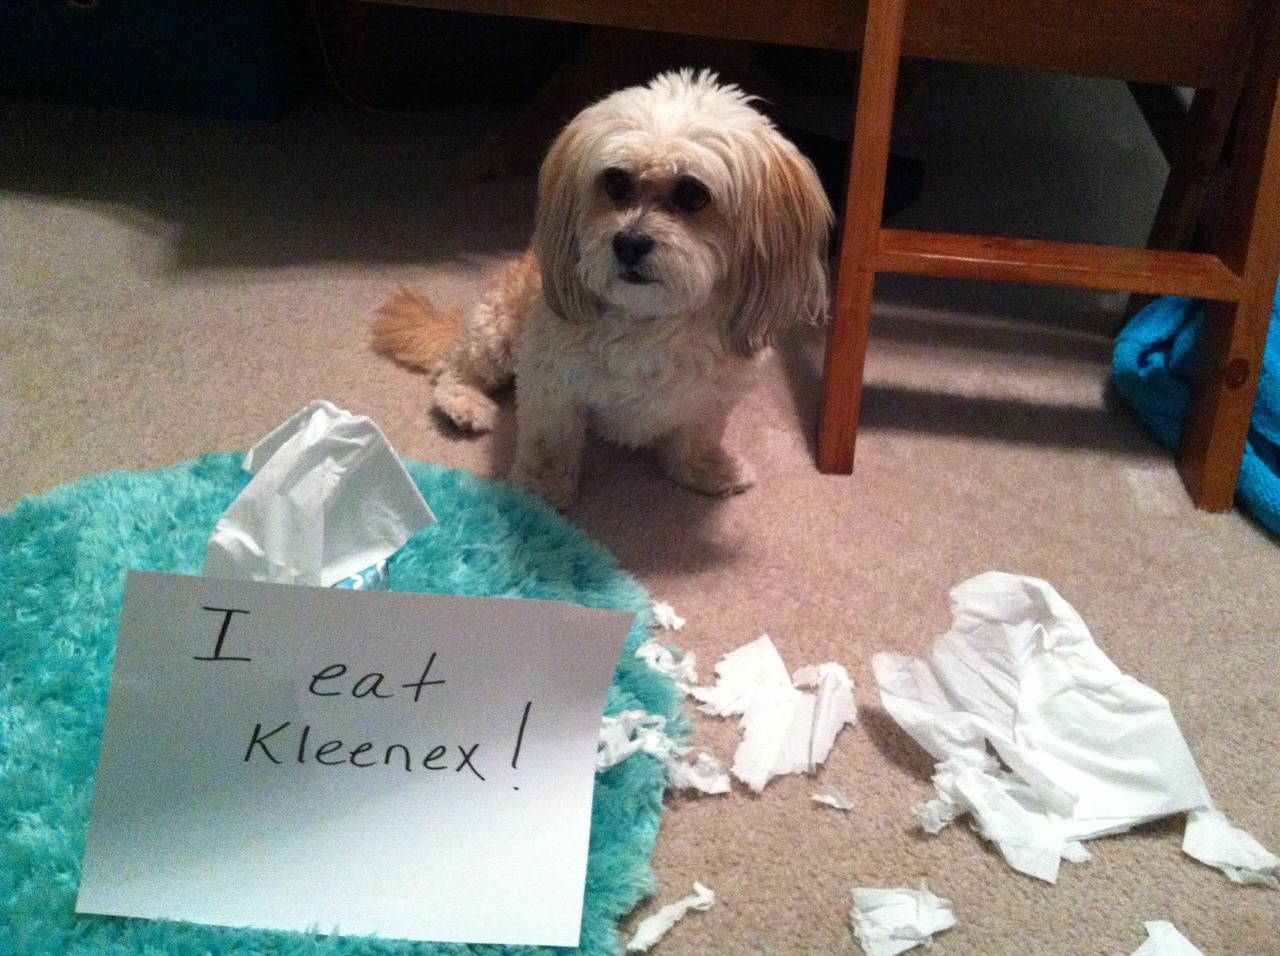 Why do dogs eat tissues?